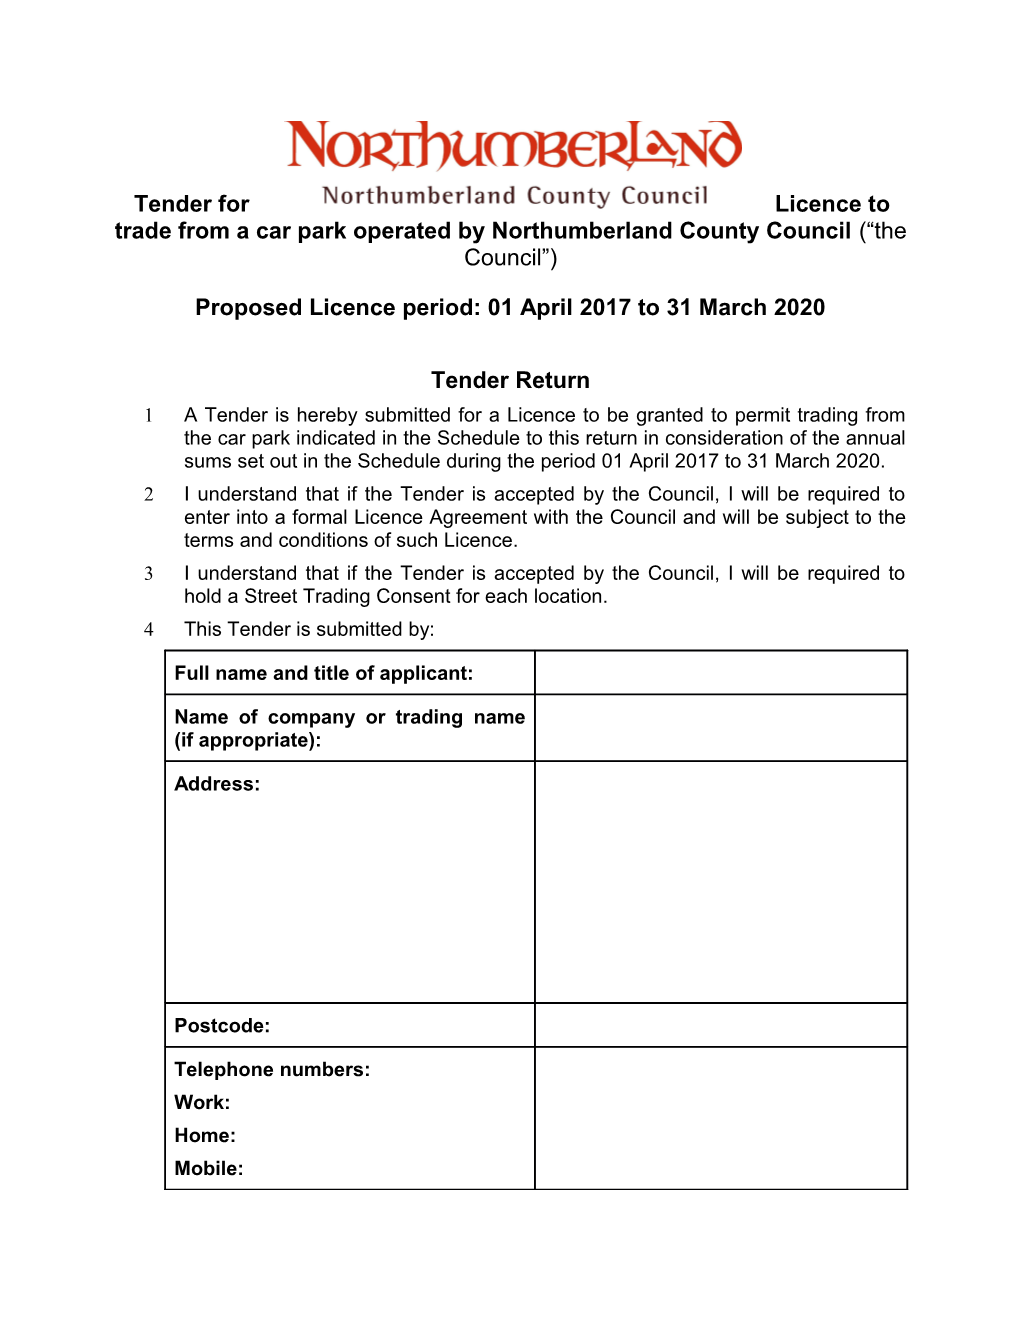 Proposed Licence Period: 01 April 2017 to 31 March 2020